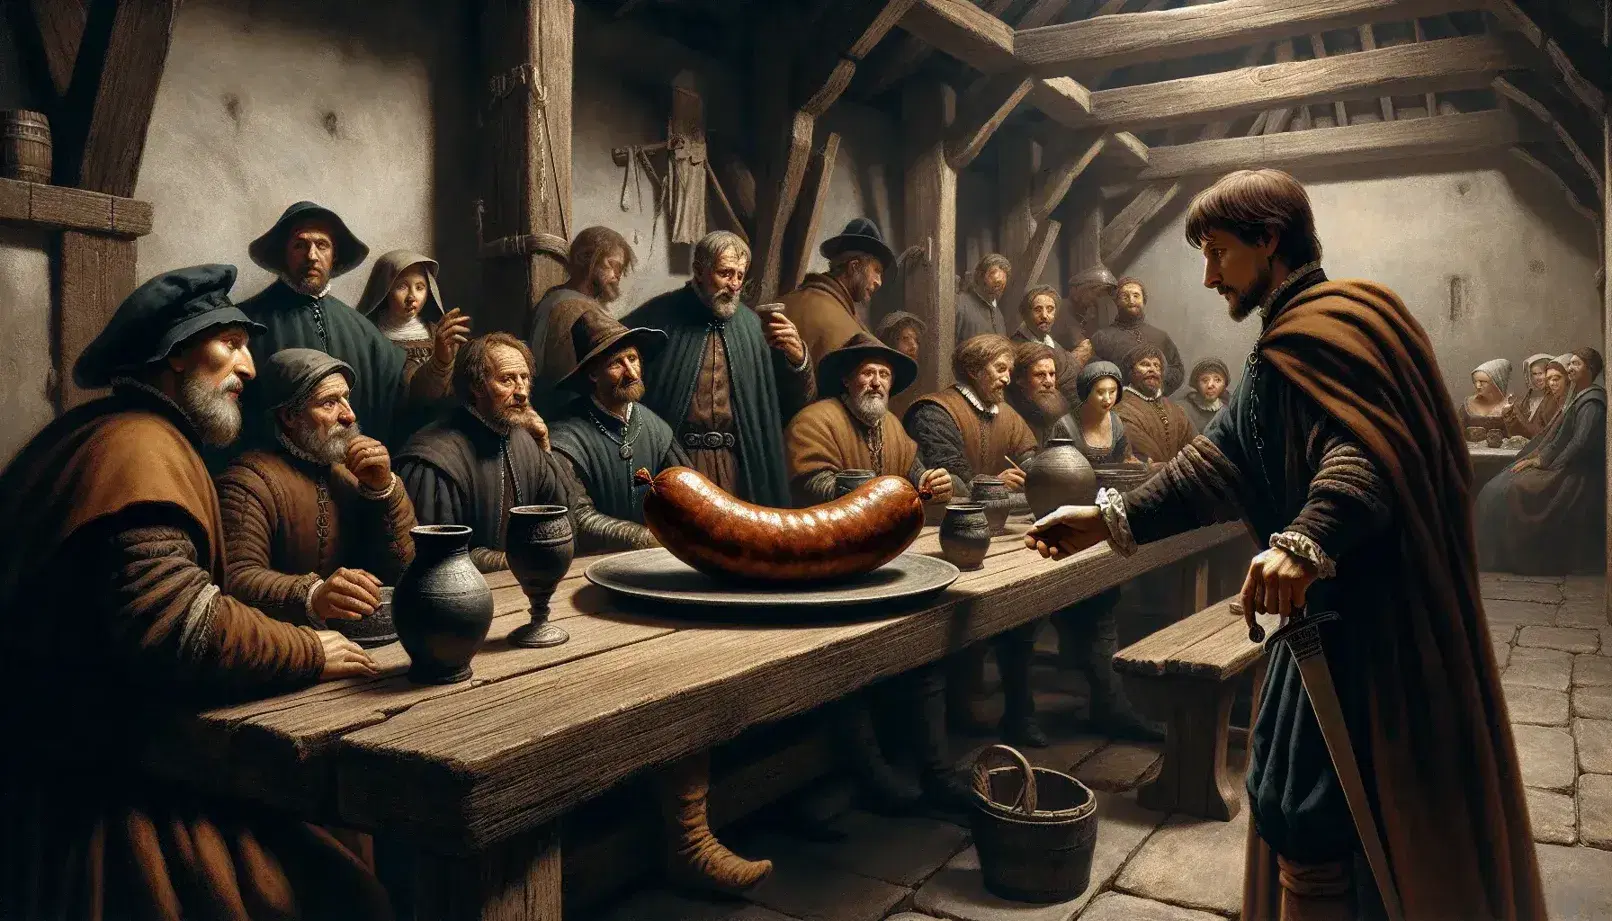 Early 16th-century scene with individuals gathered around a wooden table focused on a man reaching for a sausage, in a dimly lit room with a stone fireplace.